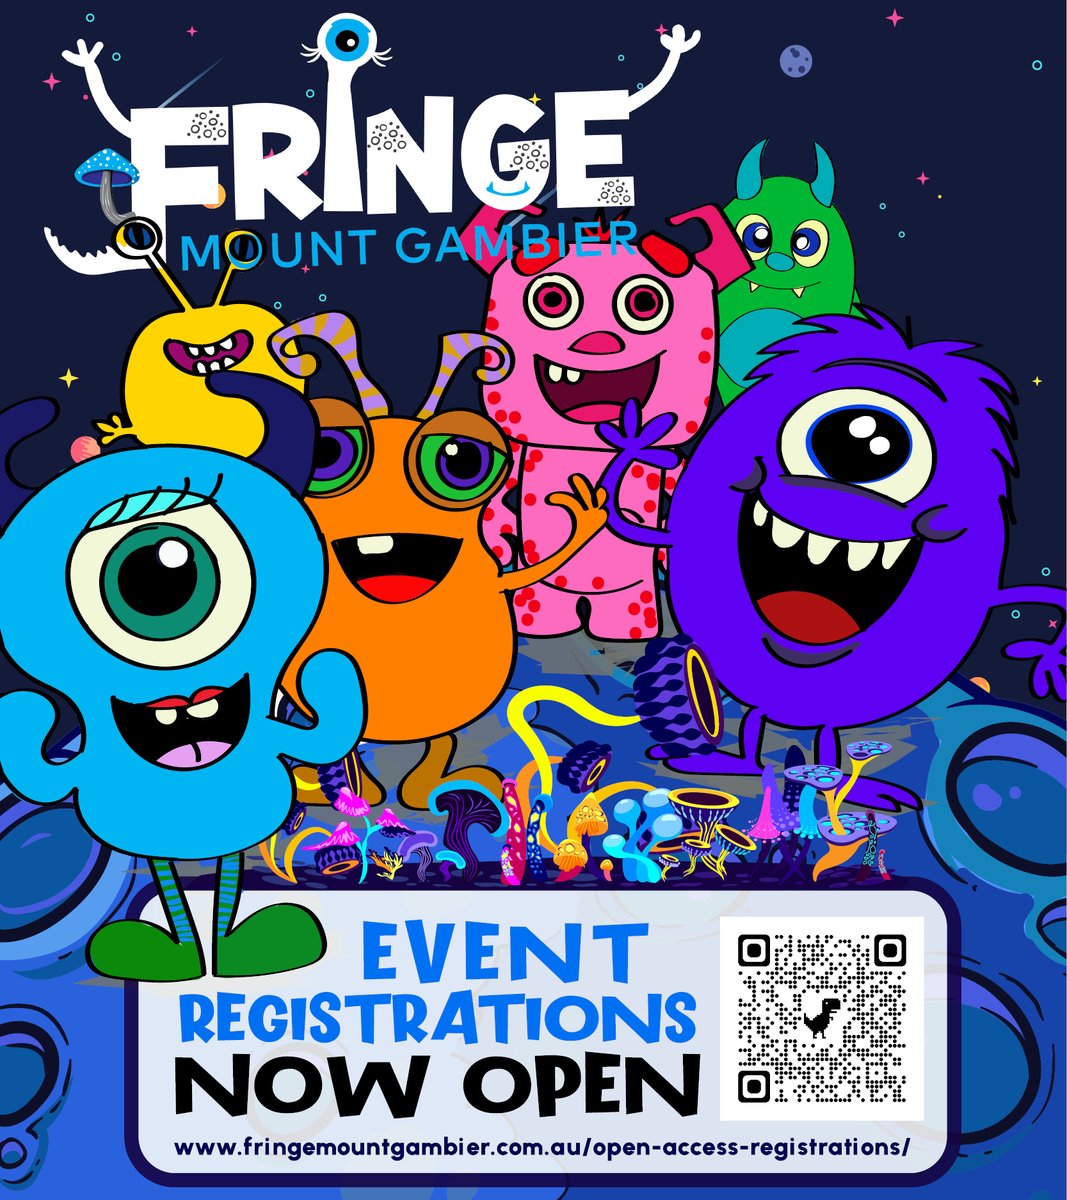 Registrations for SA's largest regional open-access arts festival are NOW OPEN! Put your event forward to be part of Fringe Mount Gambier 2022. It promises to be OUT OF THIS WORLD!
fringemountgambier.com.au/open-access-re…
#eventssouthaustralia
#fringe5290
#fringemountgambier